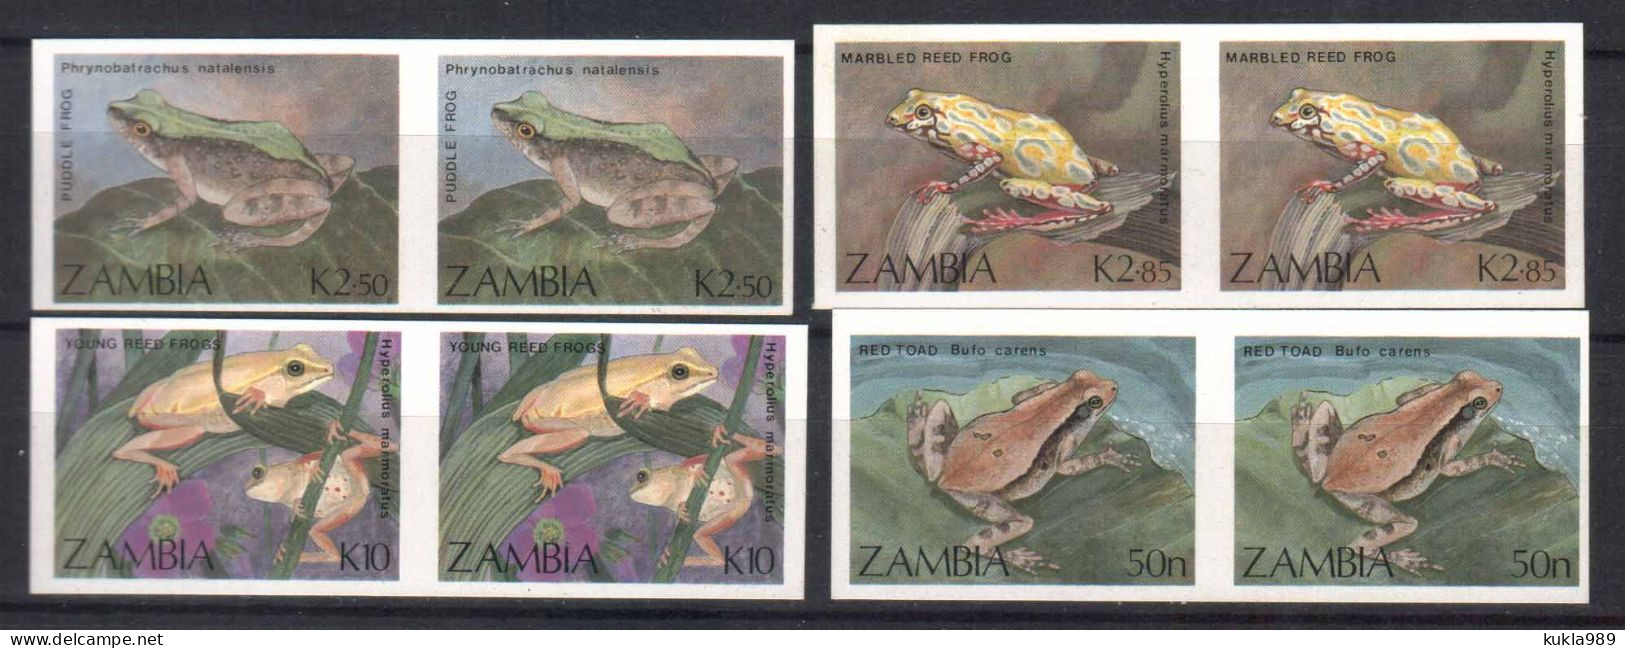 ZAMBIA STAMPS, 1989, Sc.#462-464. FROGS & TOADS. IMPERF. PAIRS, MNH - Zambie (1965-...)